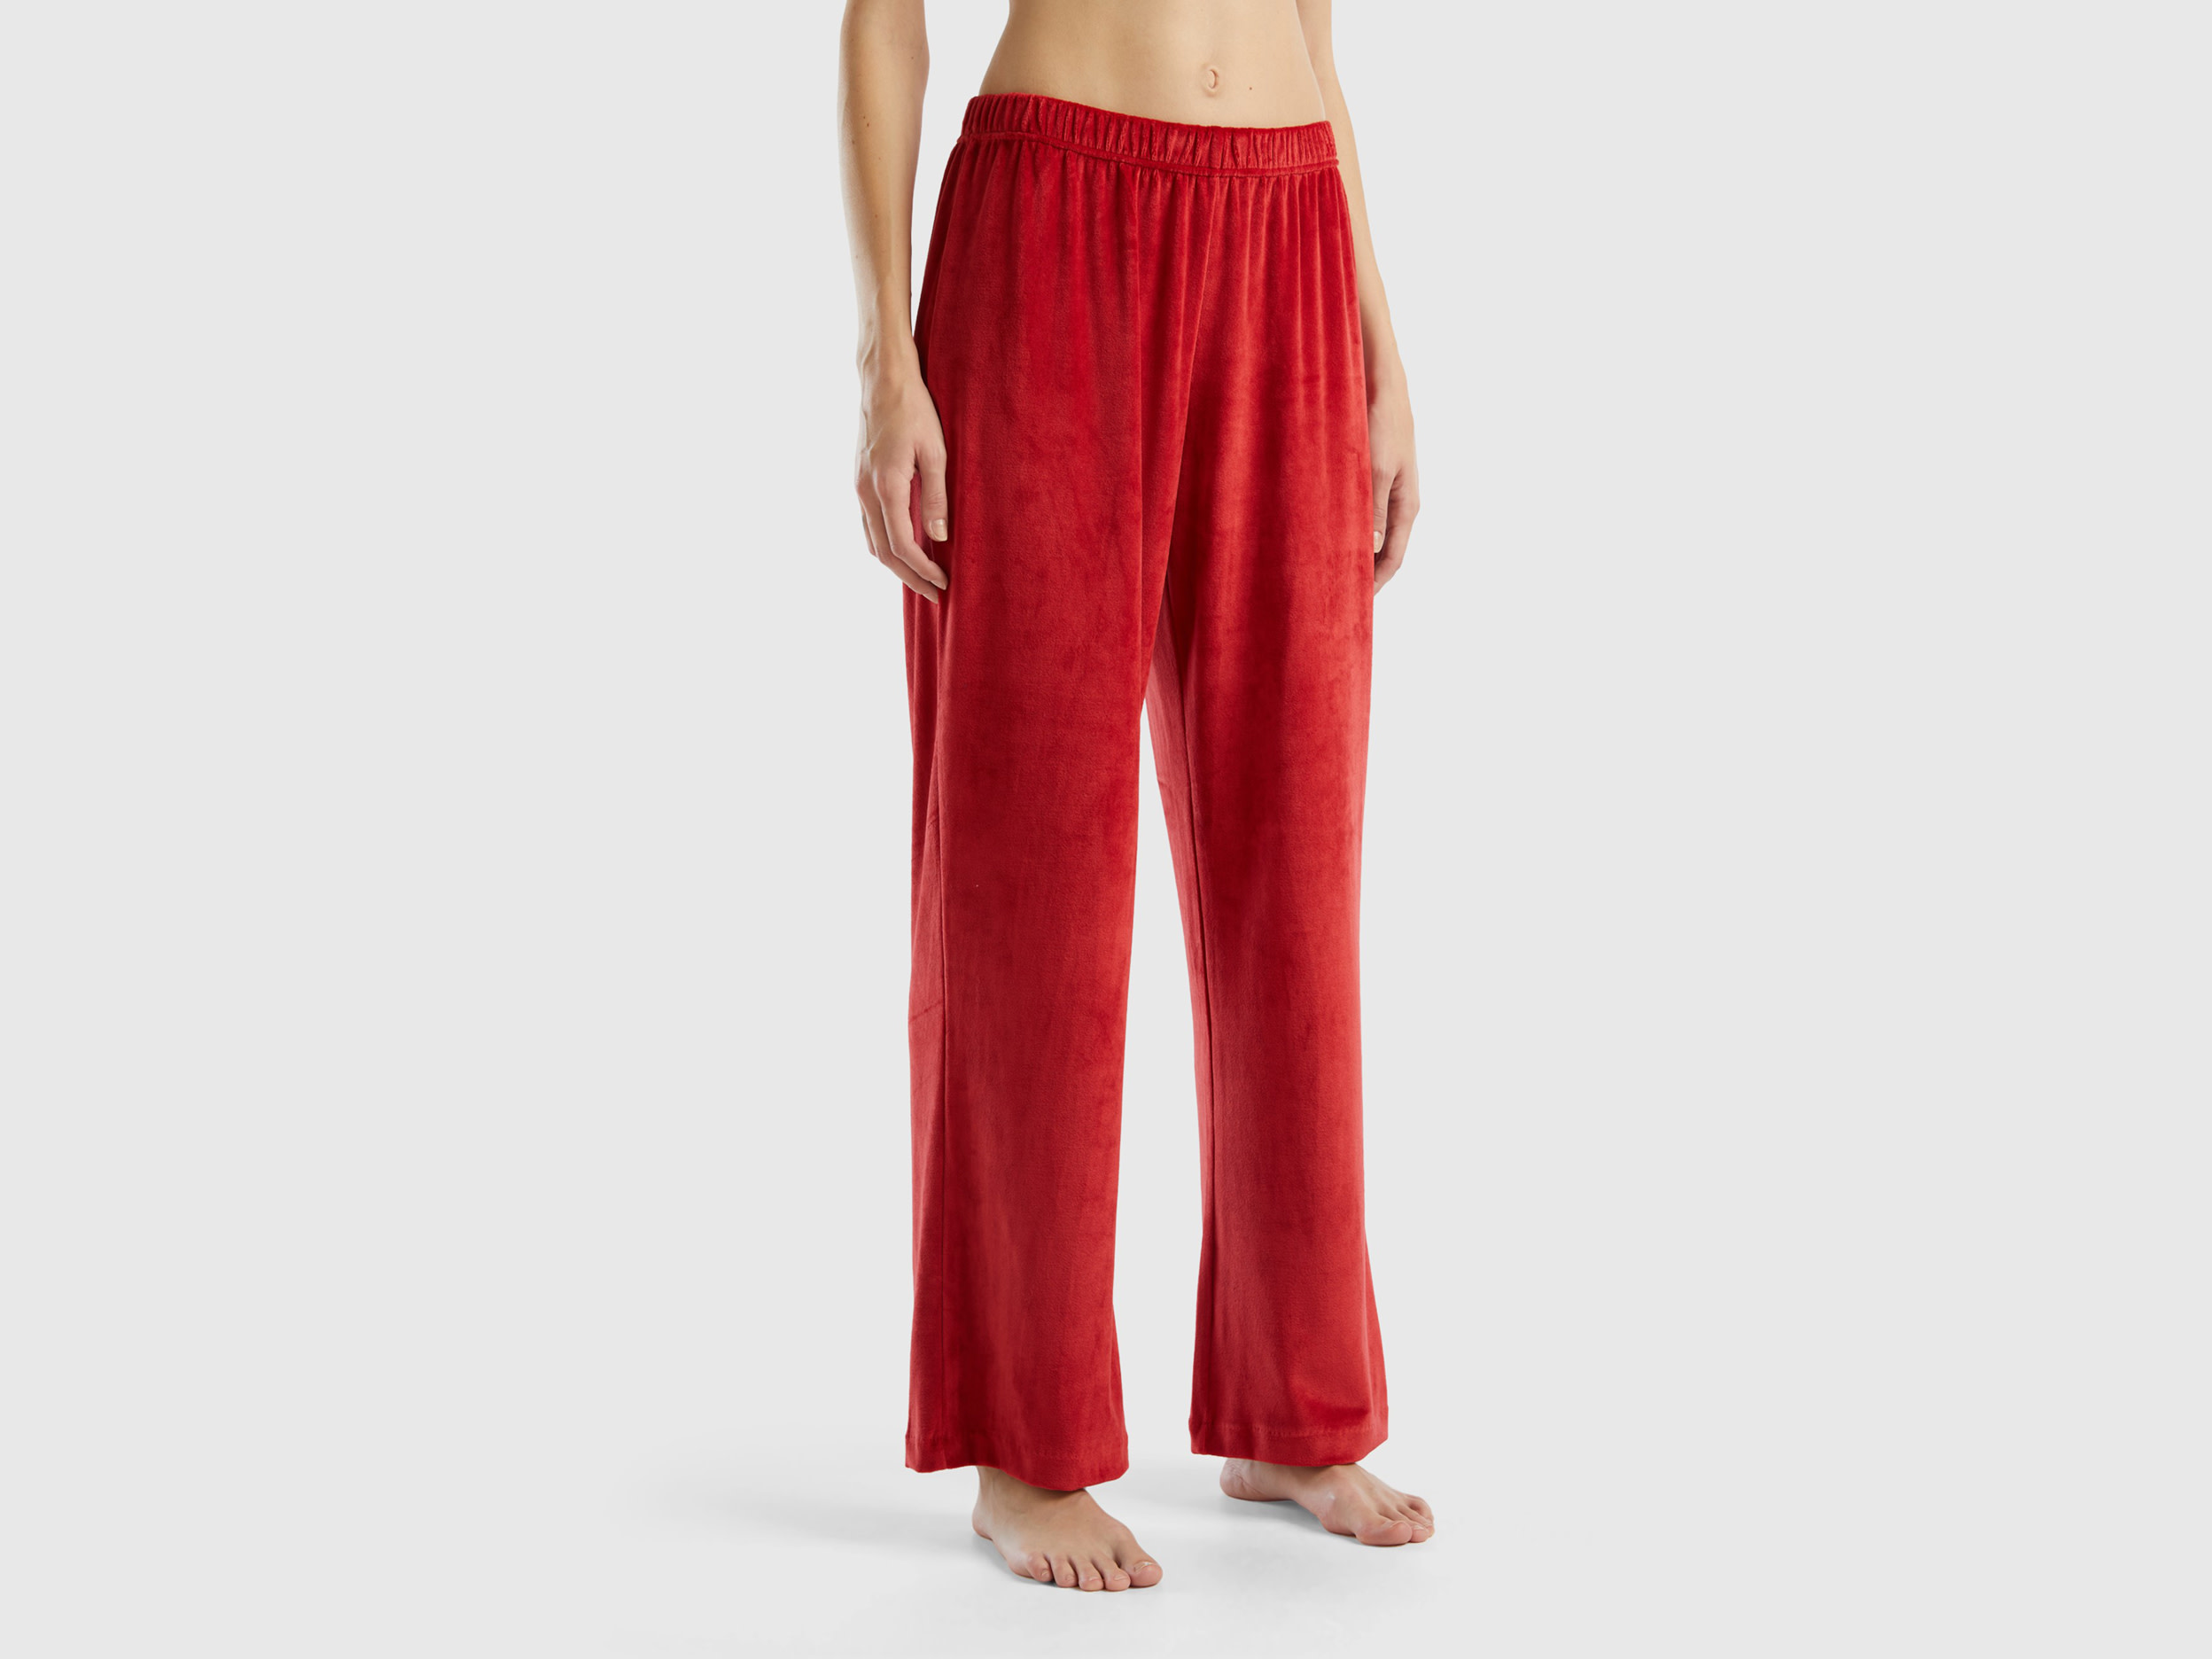 Benetton, Velour Palazzo Trousers, size L, Red, Women